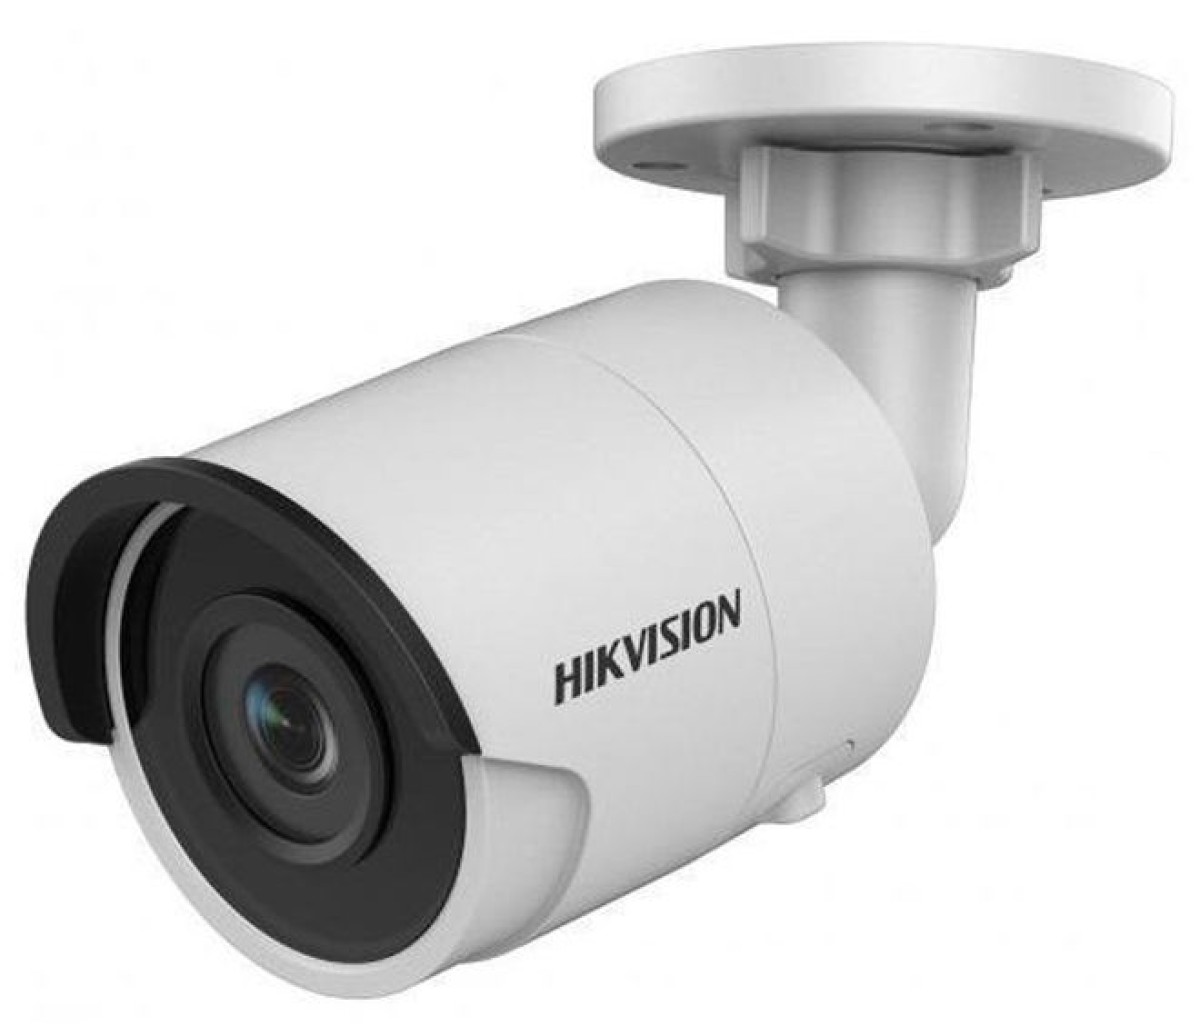 IP-камера Hikvision DS-2CD2035FWD-I (4.0) 256_221.jpg